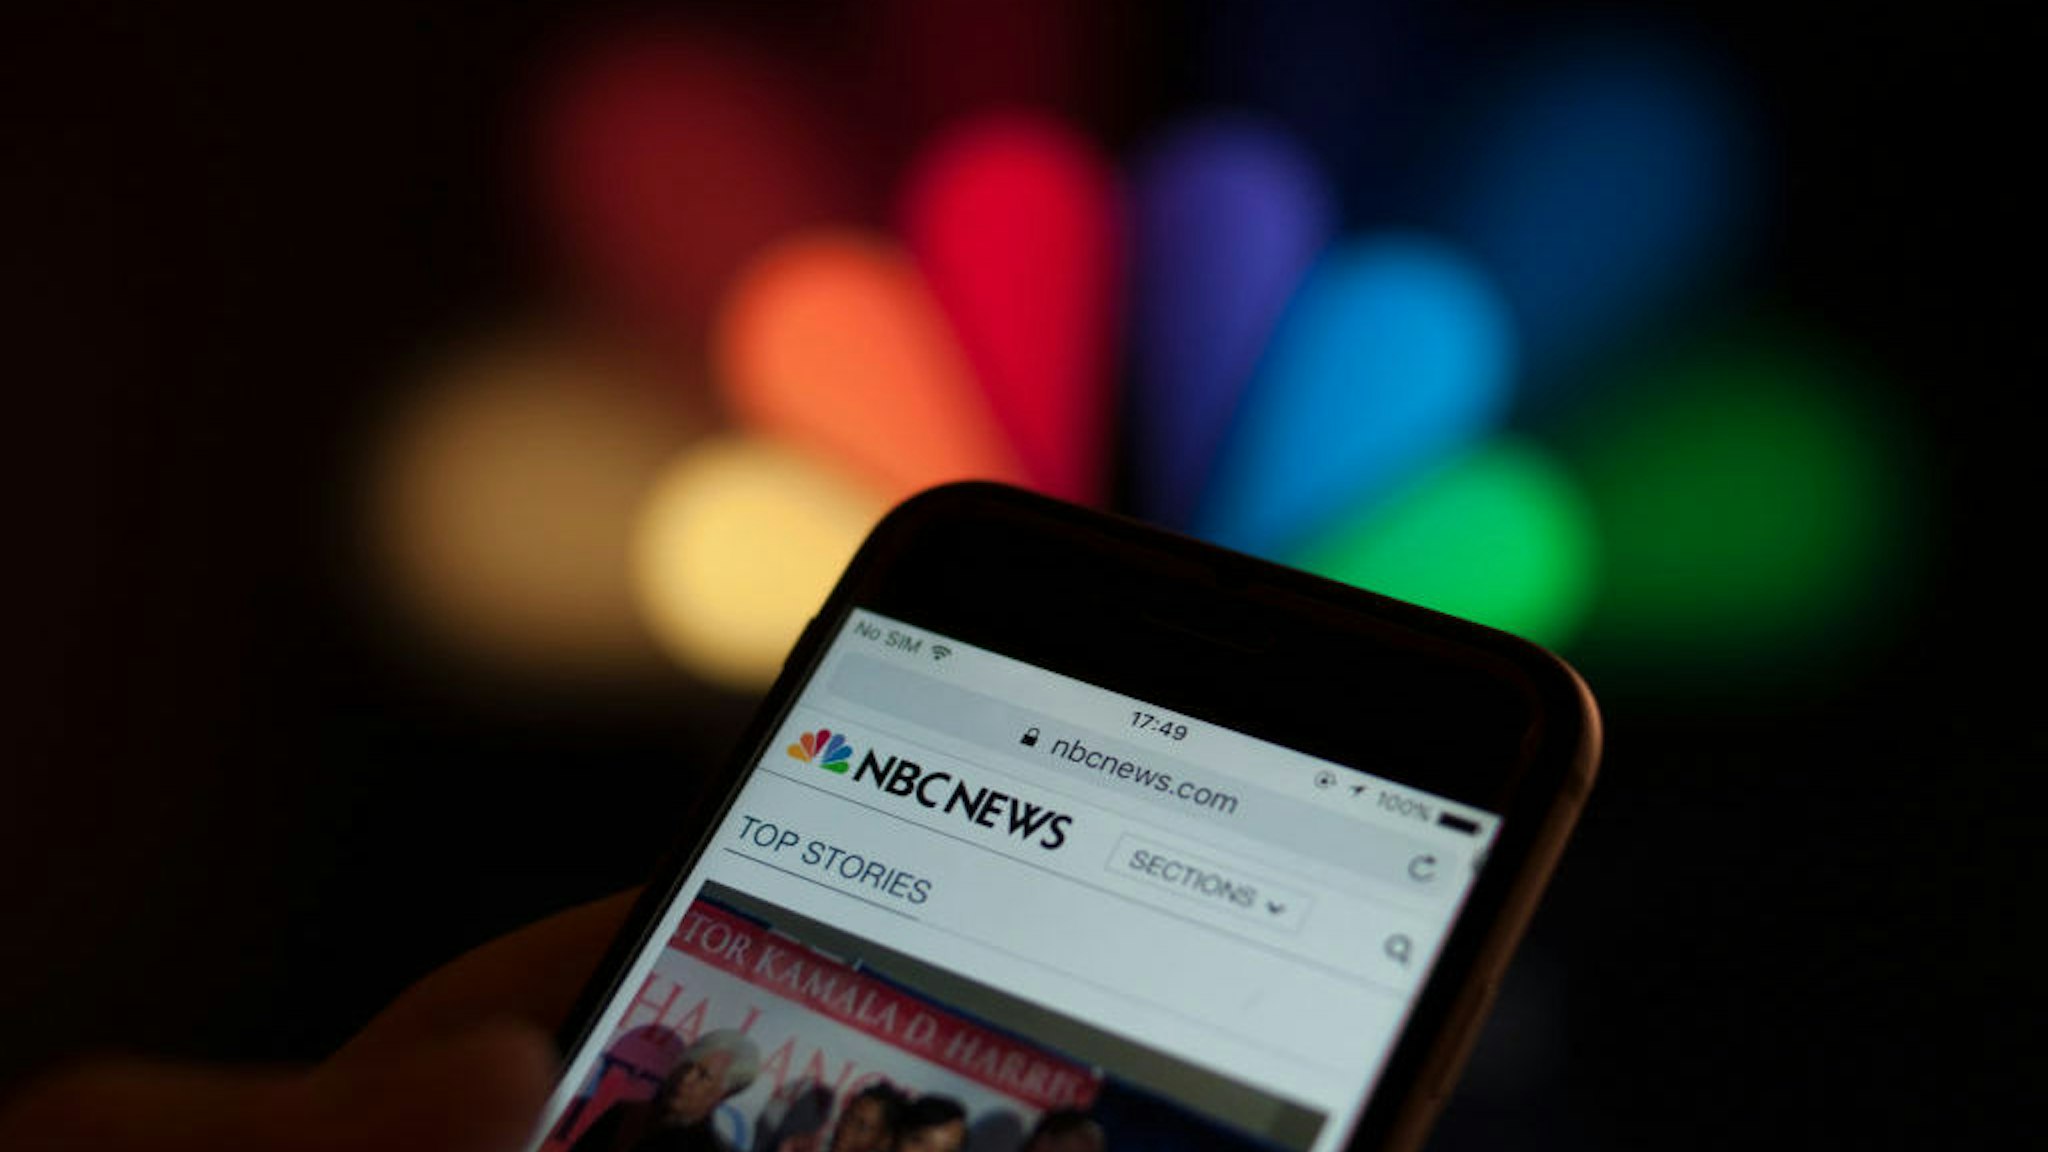 The NBC news app is seen on a smartphone in this photo illustration on December 5, 2017. (Photo by Jaap Arriens/NurPhoto)